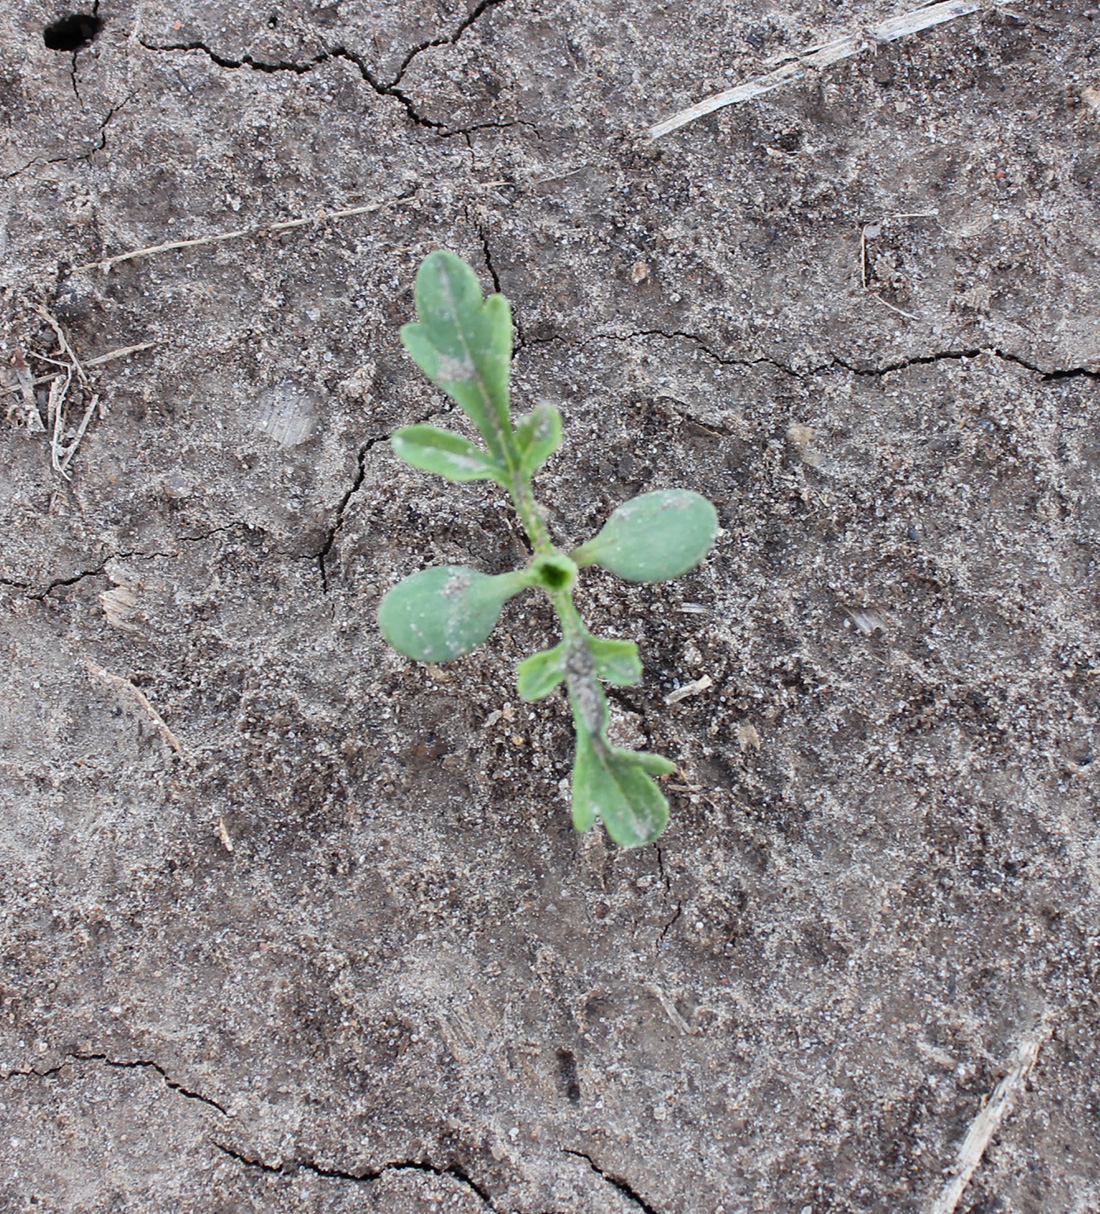 A 2-leaf seedling plant with its round cotyledons and lobed leaves